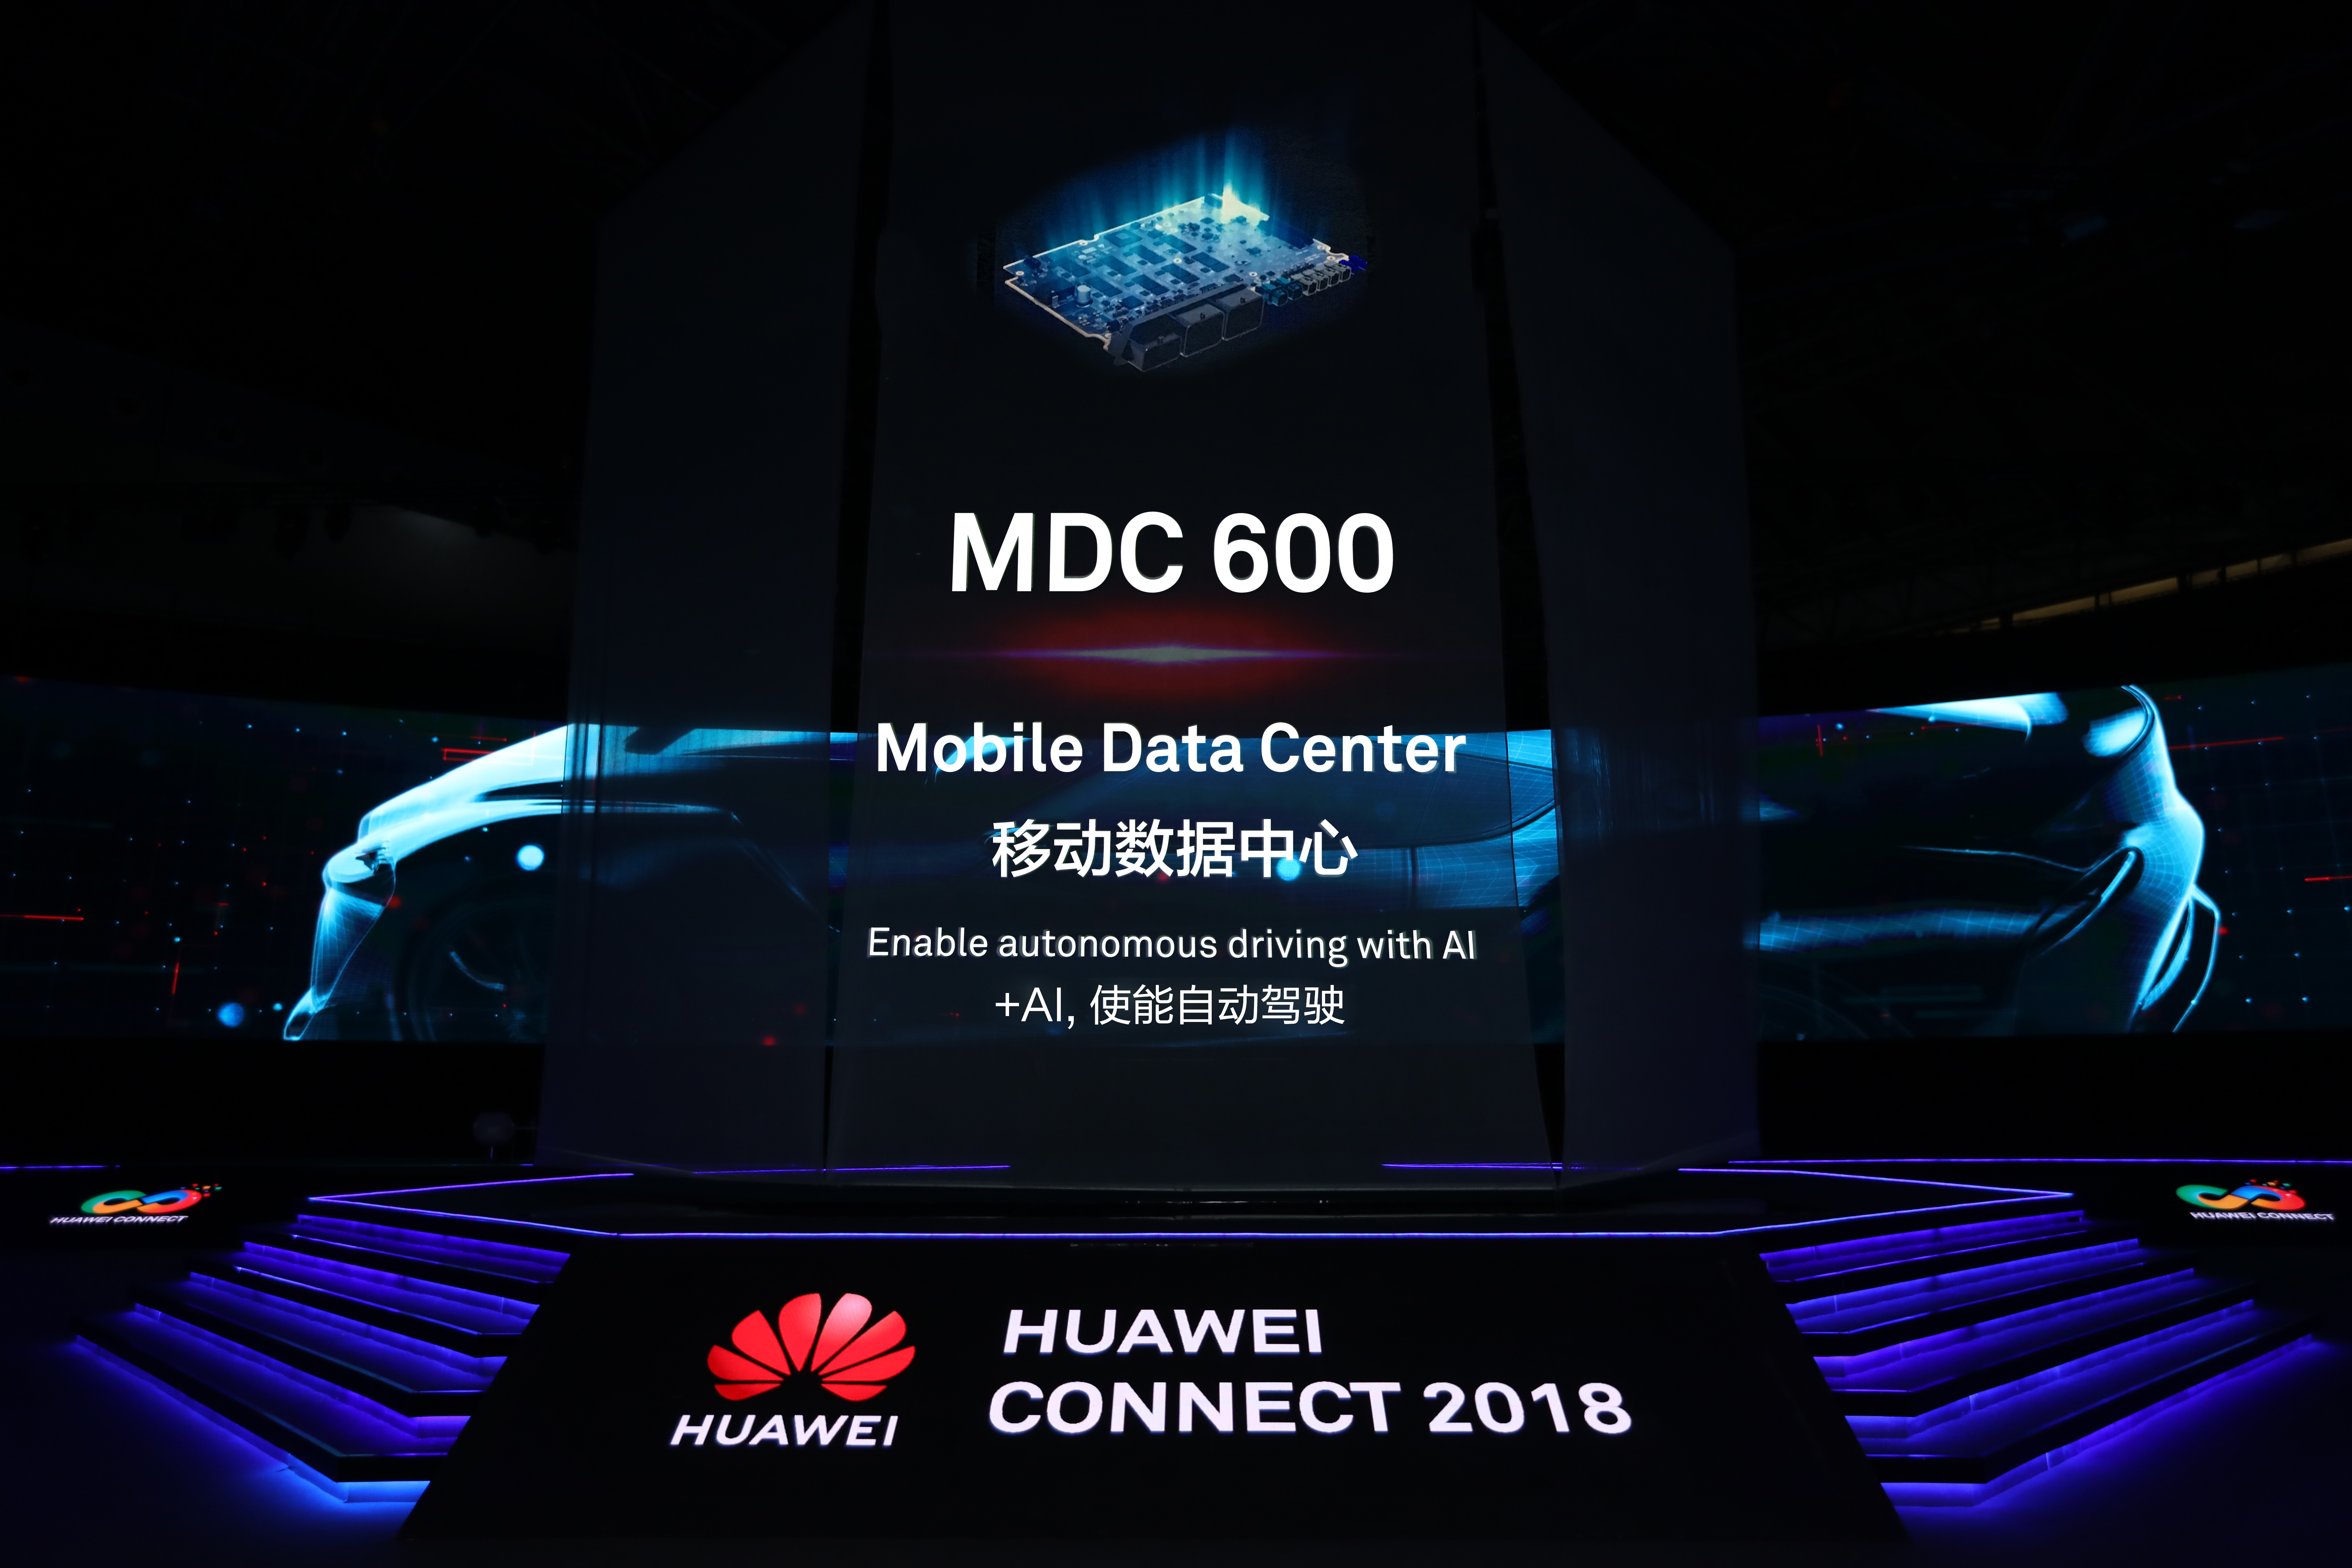 The empty stage and backdrop at the Mobile Data Center 600 launch at HUAWEI CONNECT 2018